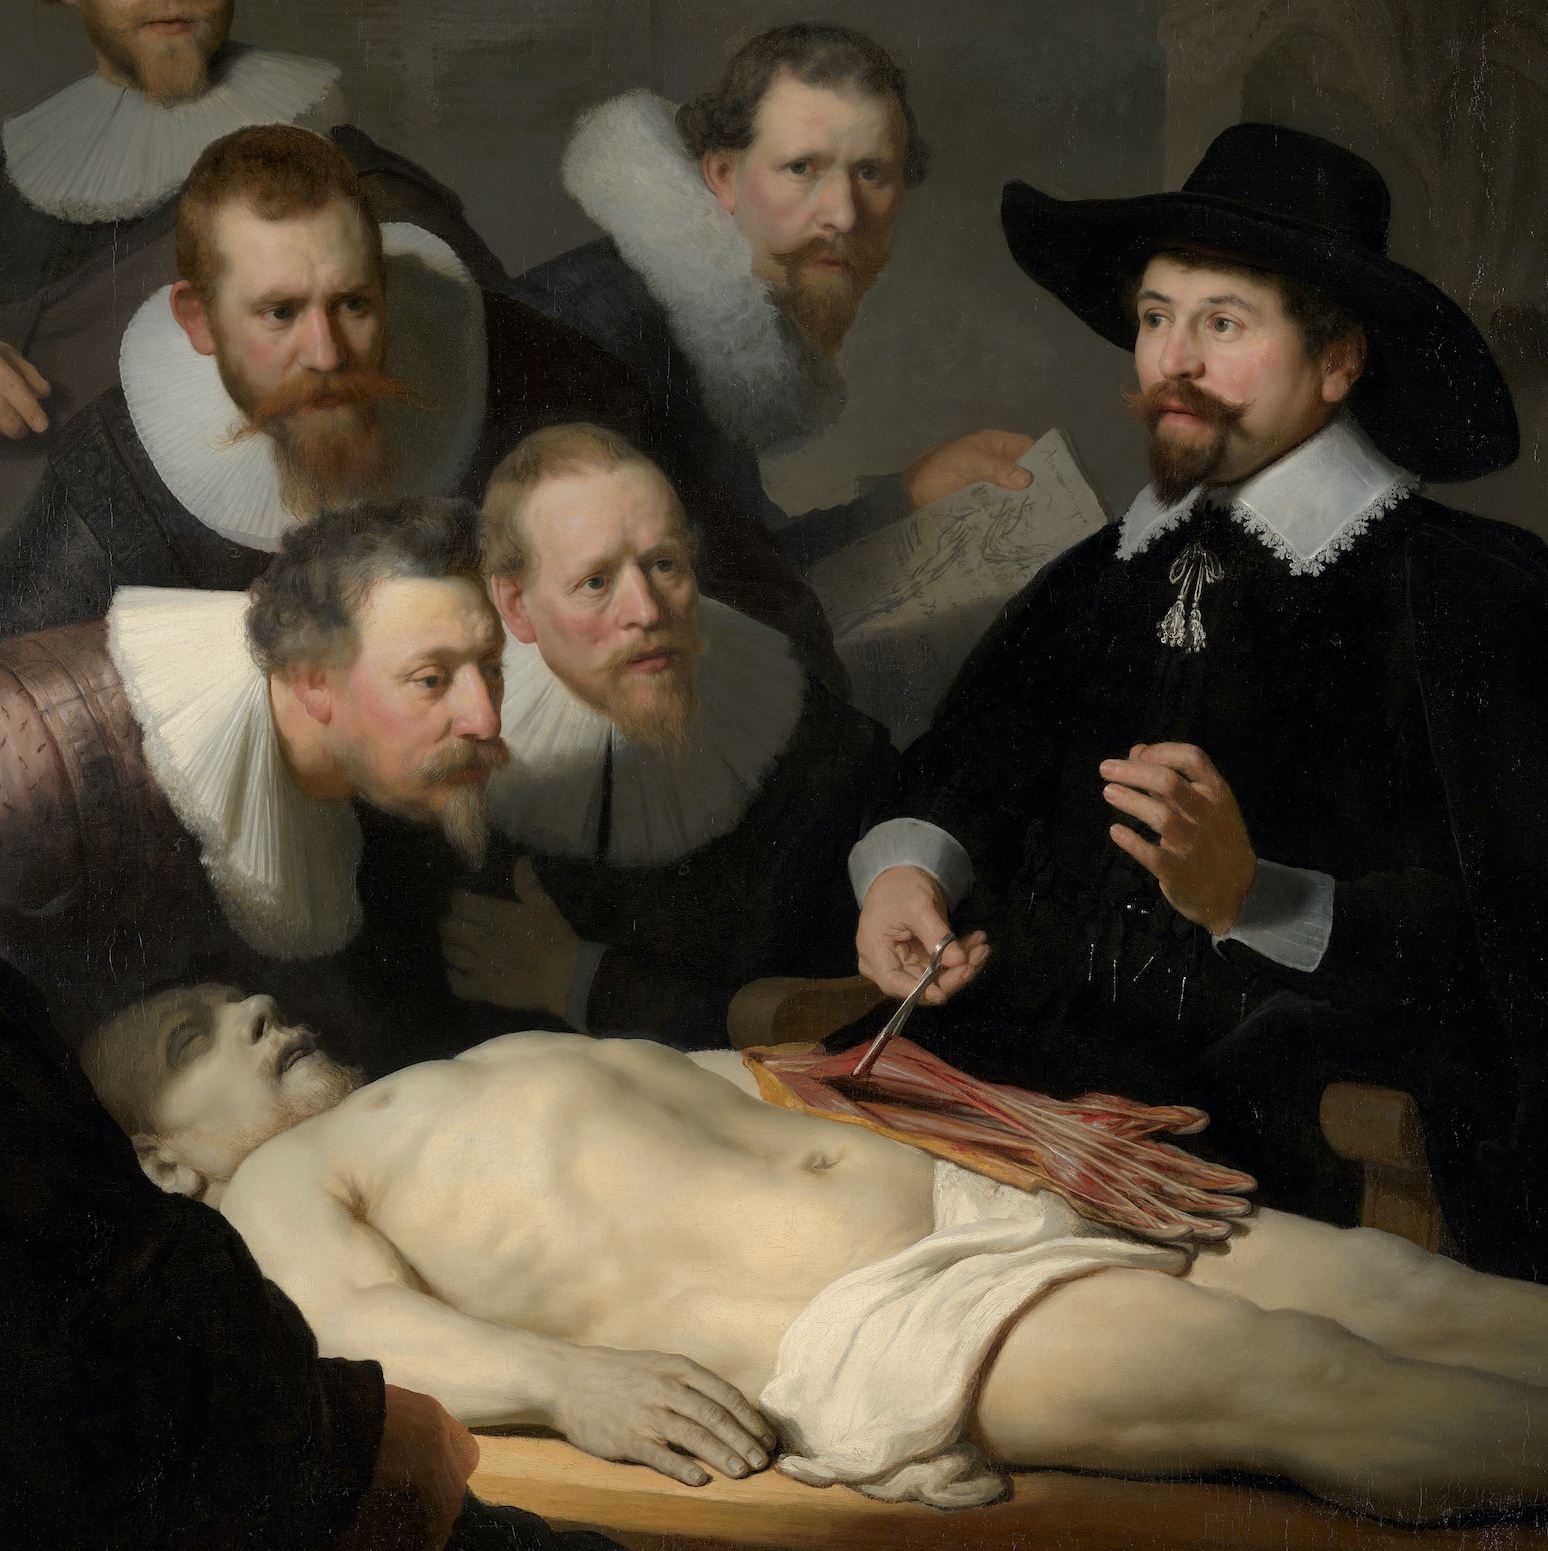 Dr. Tulp displaying the flexors in a cadaver's arm (detail), Rembrandt van Rijn, The Anatomy Lesson of Dr. Tulp, 1632, oil on canvas, 169.5 x 216.5 cm (Mauritshuis, The Hague, Netherlands)